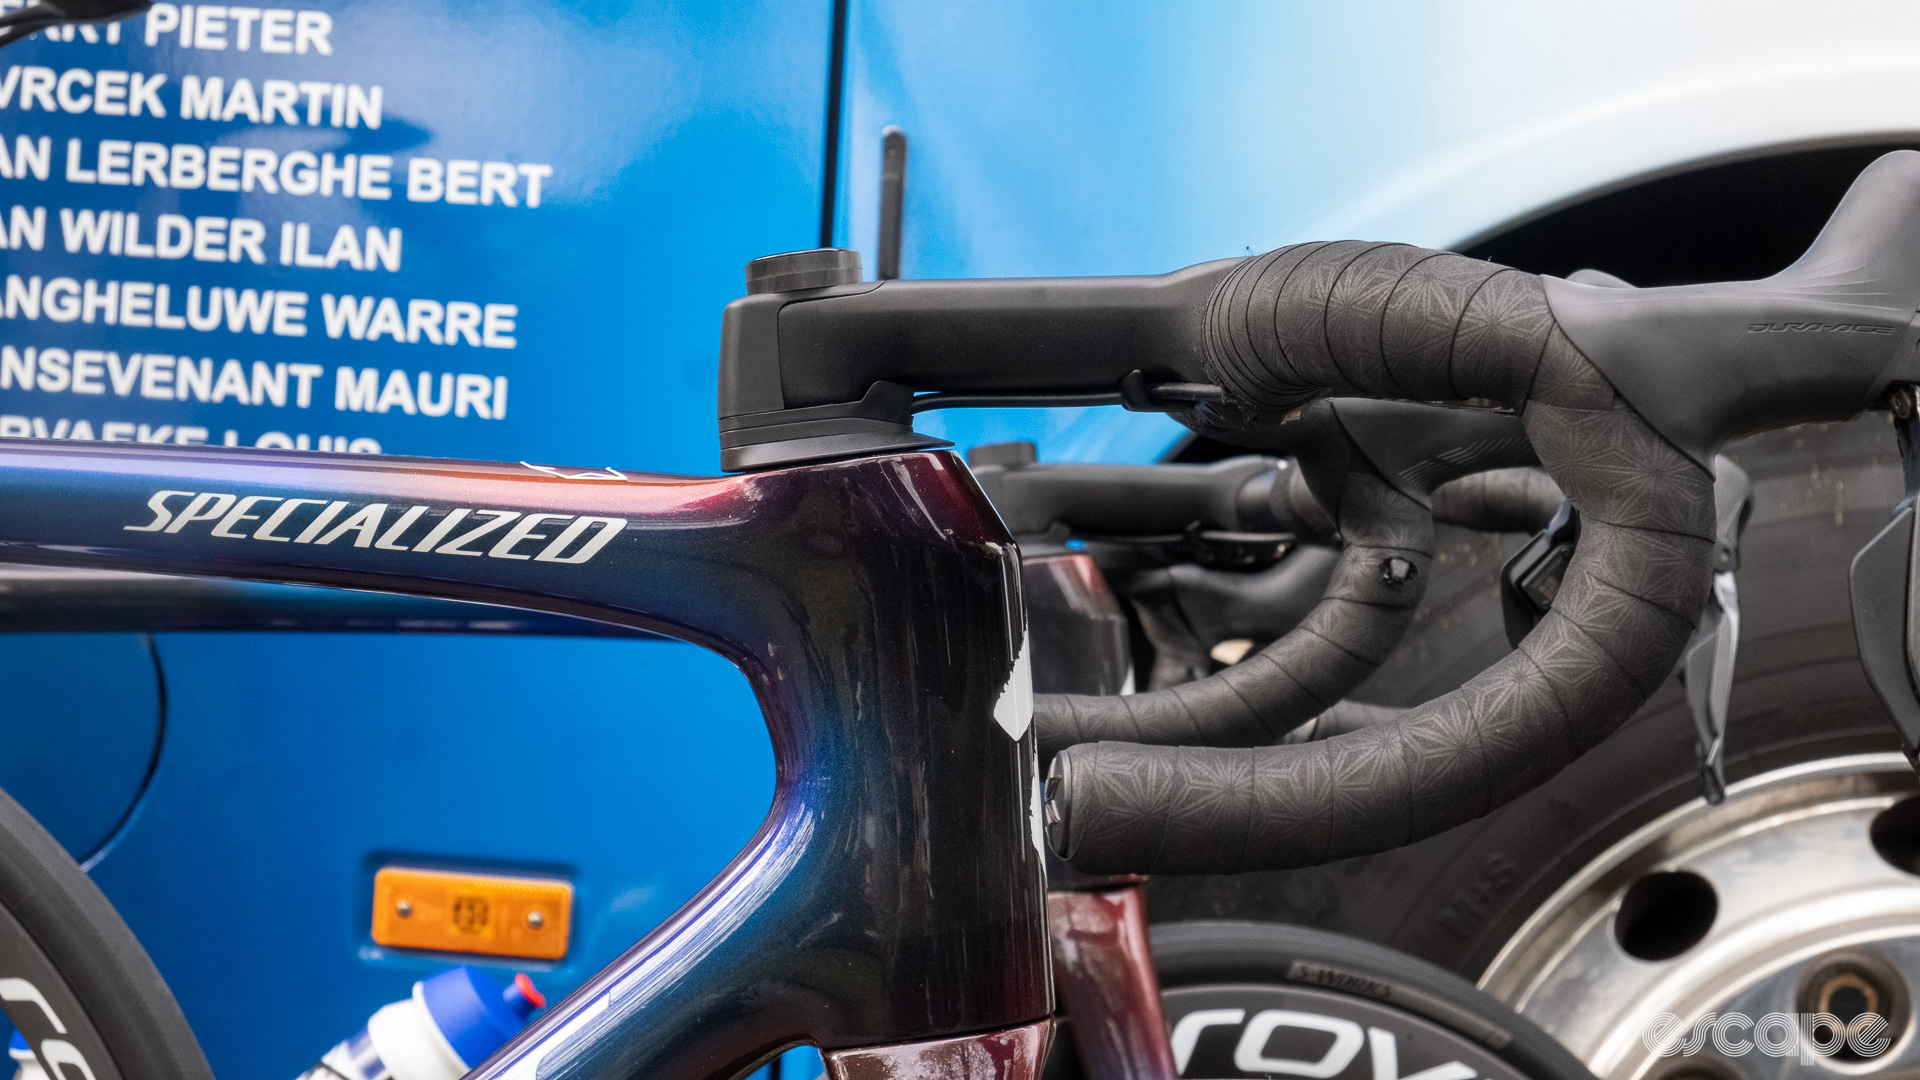 The image shows a handlebar and stem